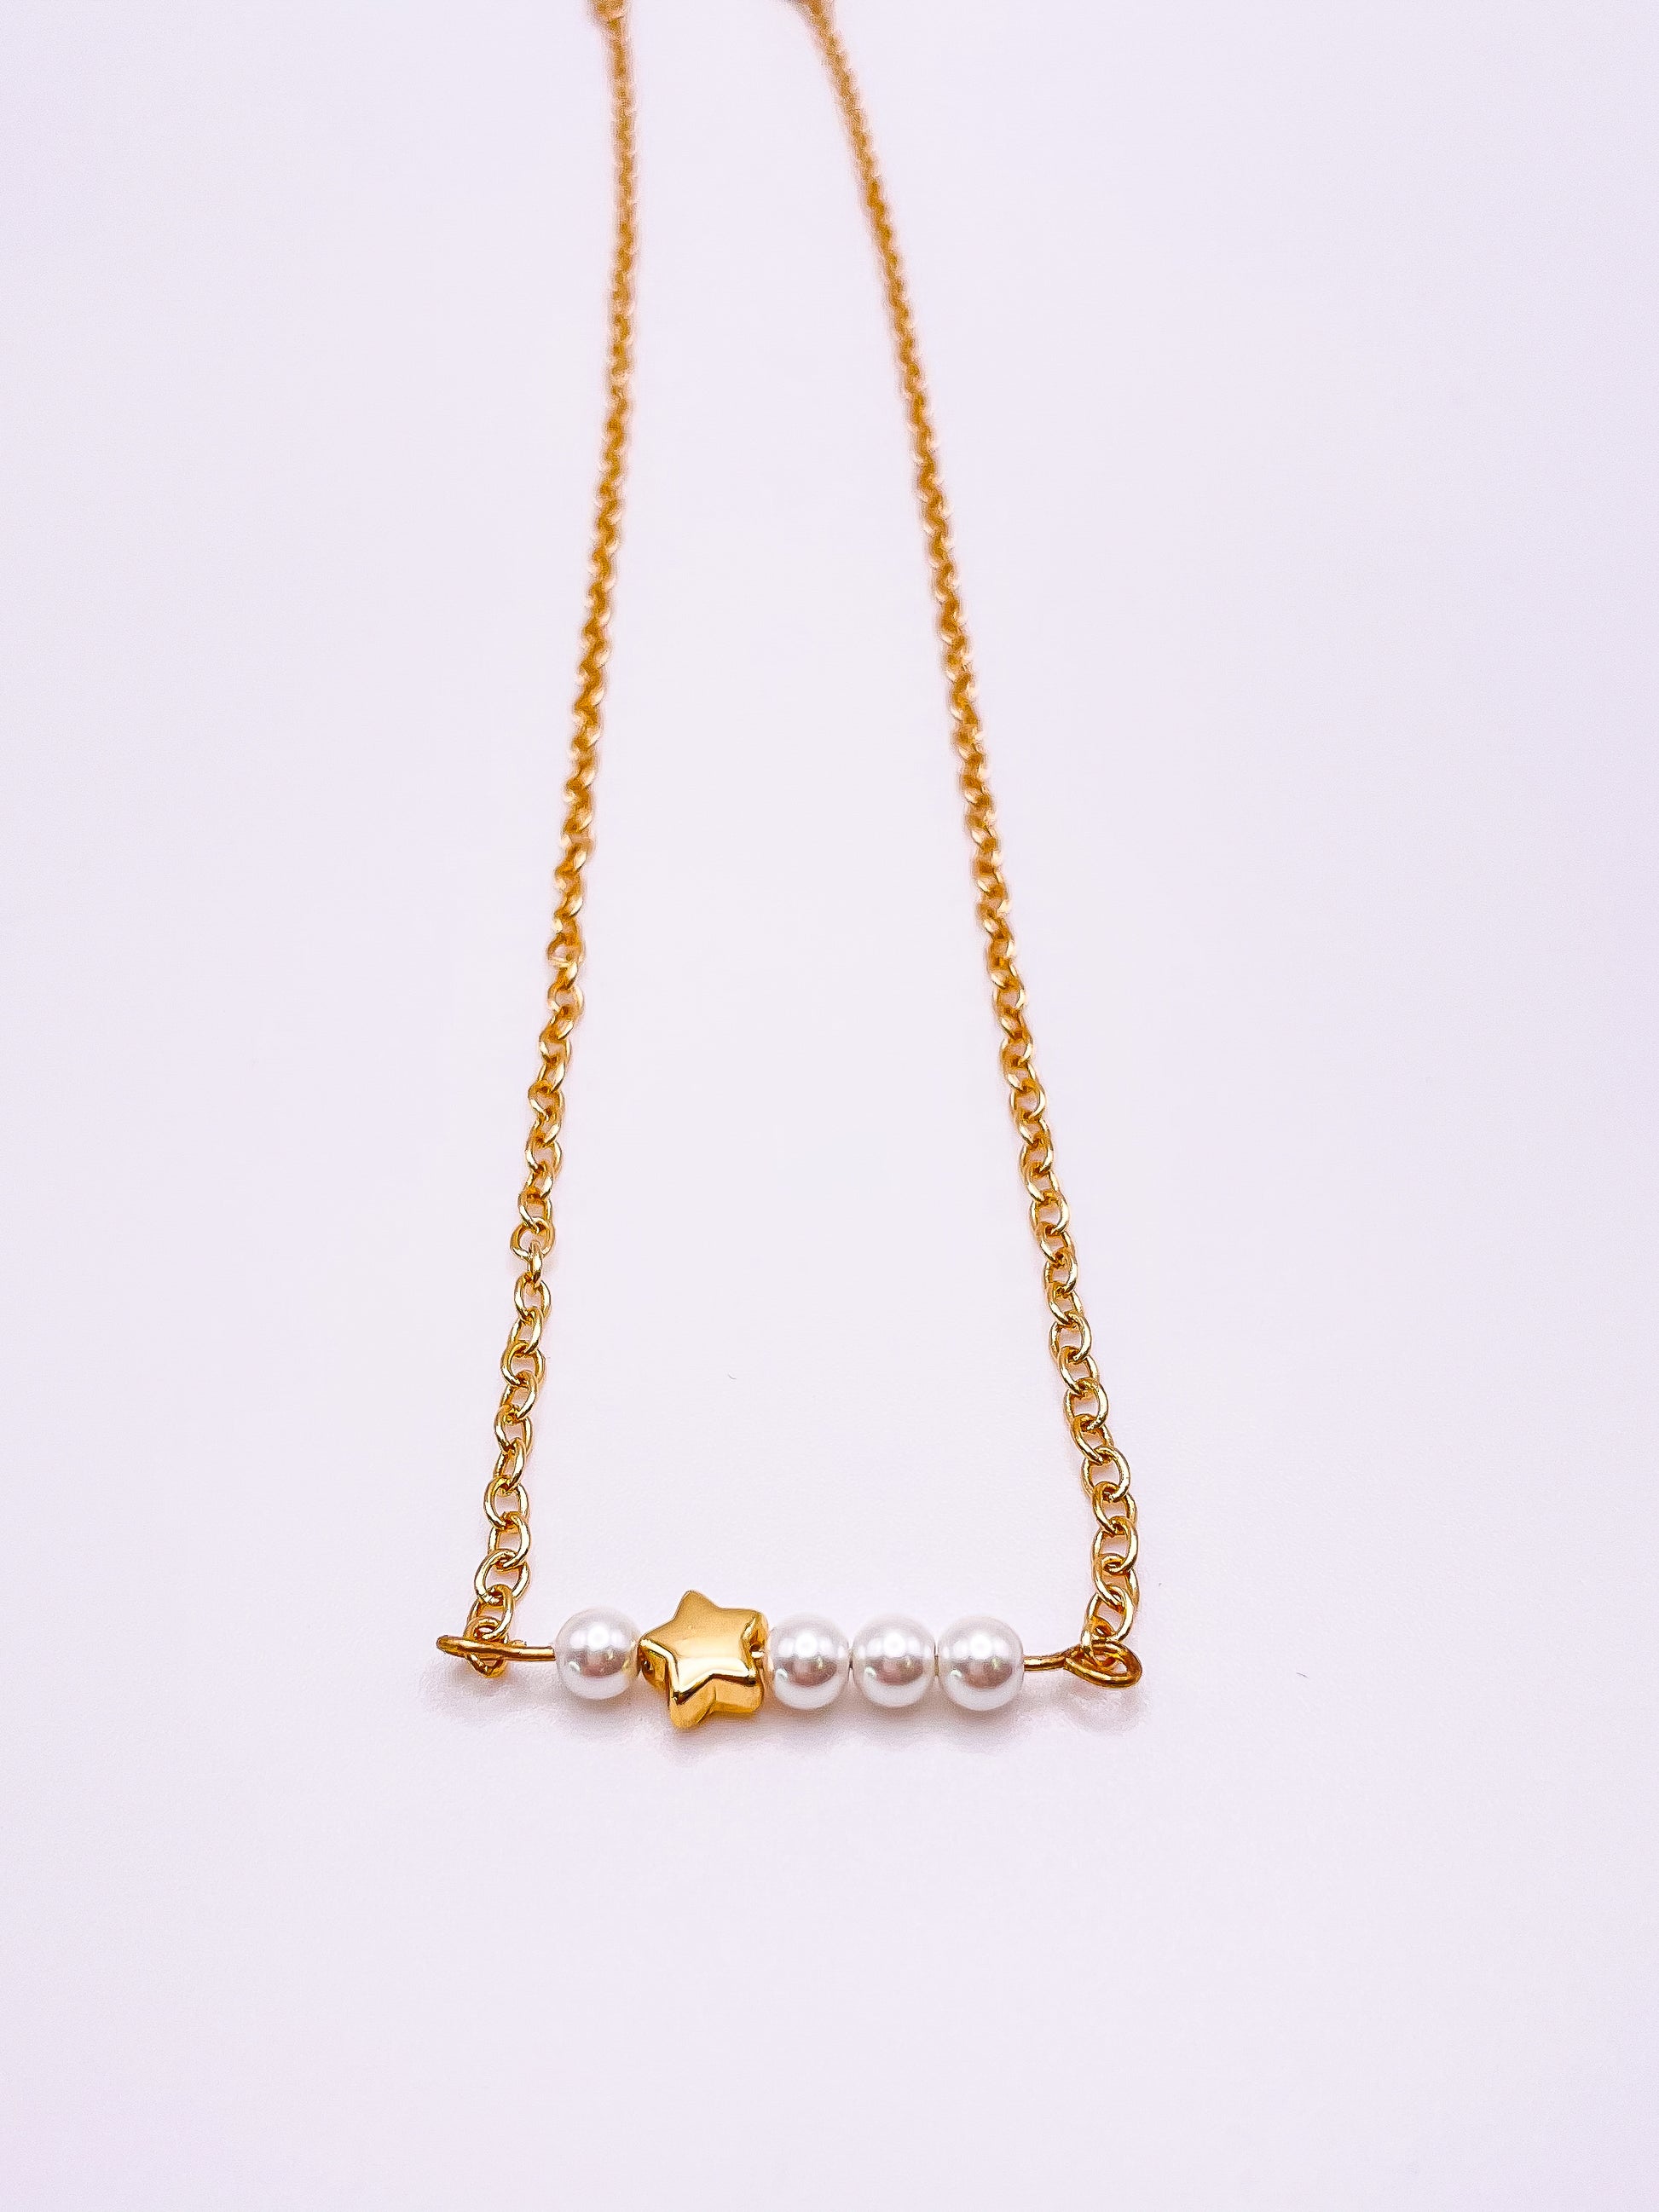 Gold necklace with little star and pearls.